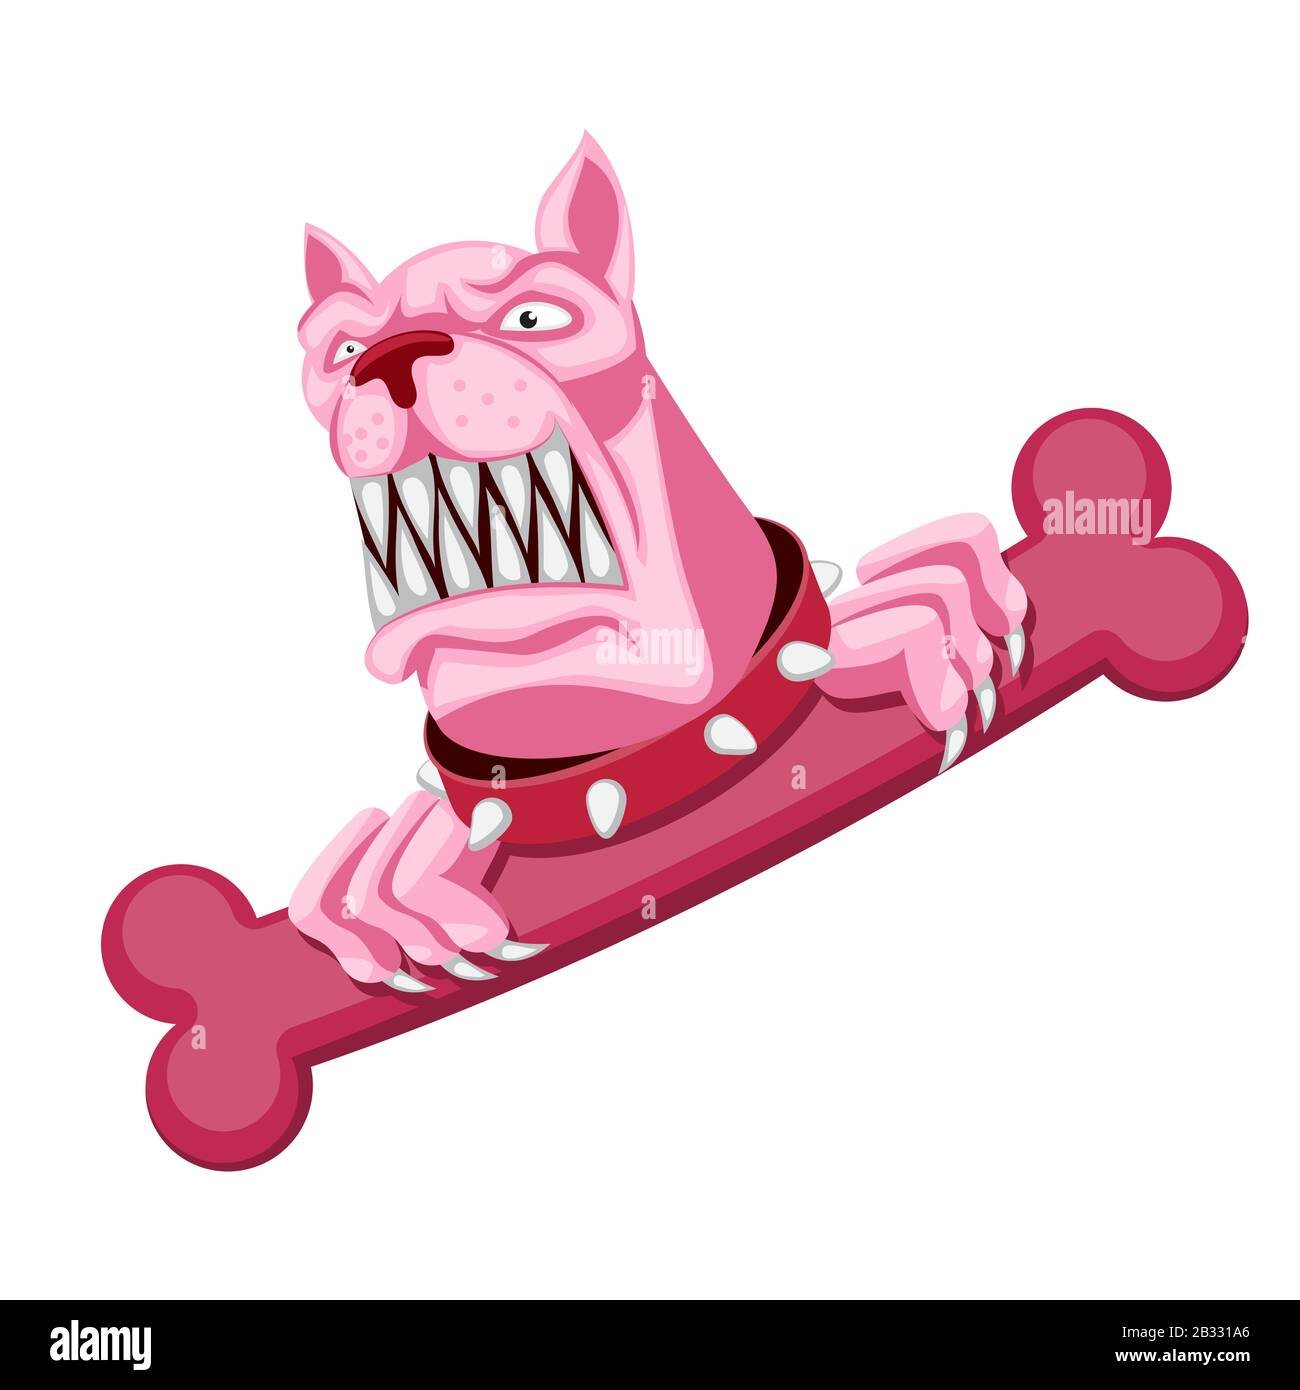 The character is a pink angry dog with a bone and collar on a white isolated background. Vector image Stock Vector